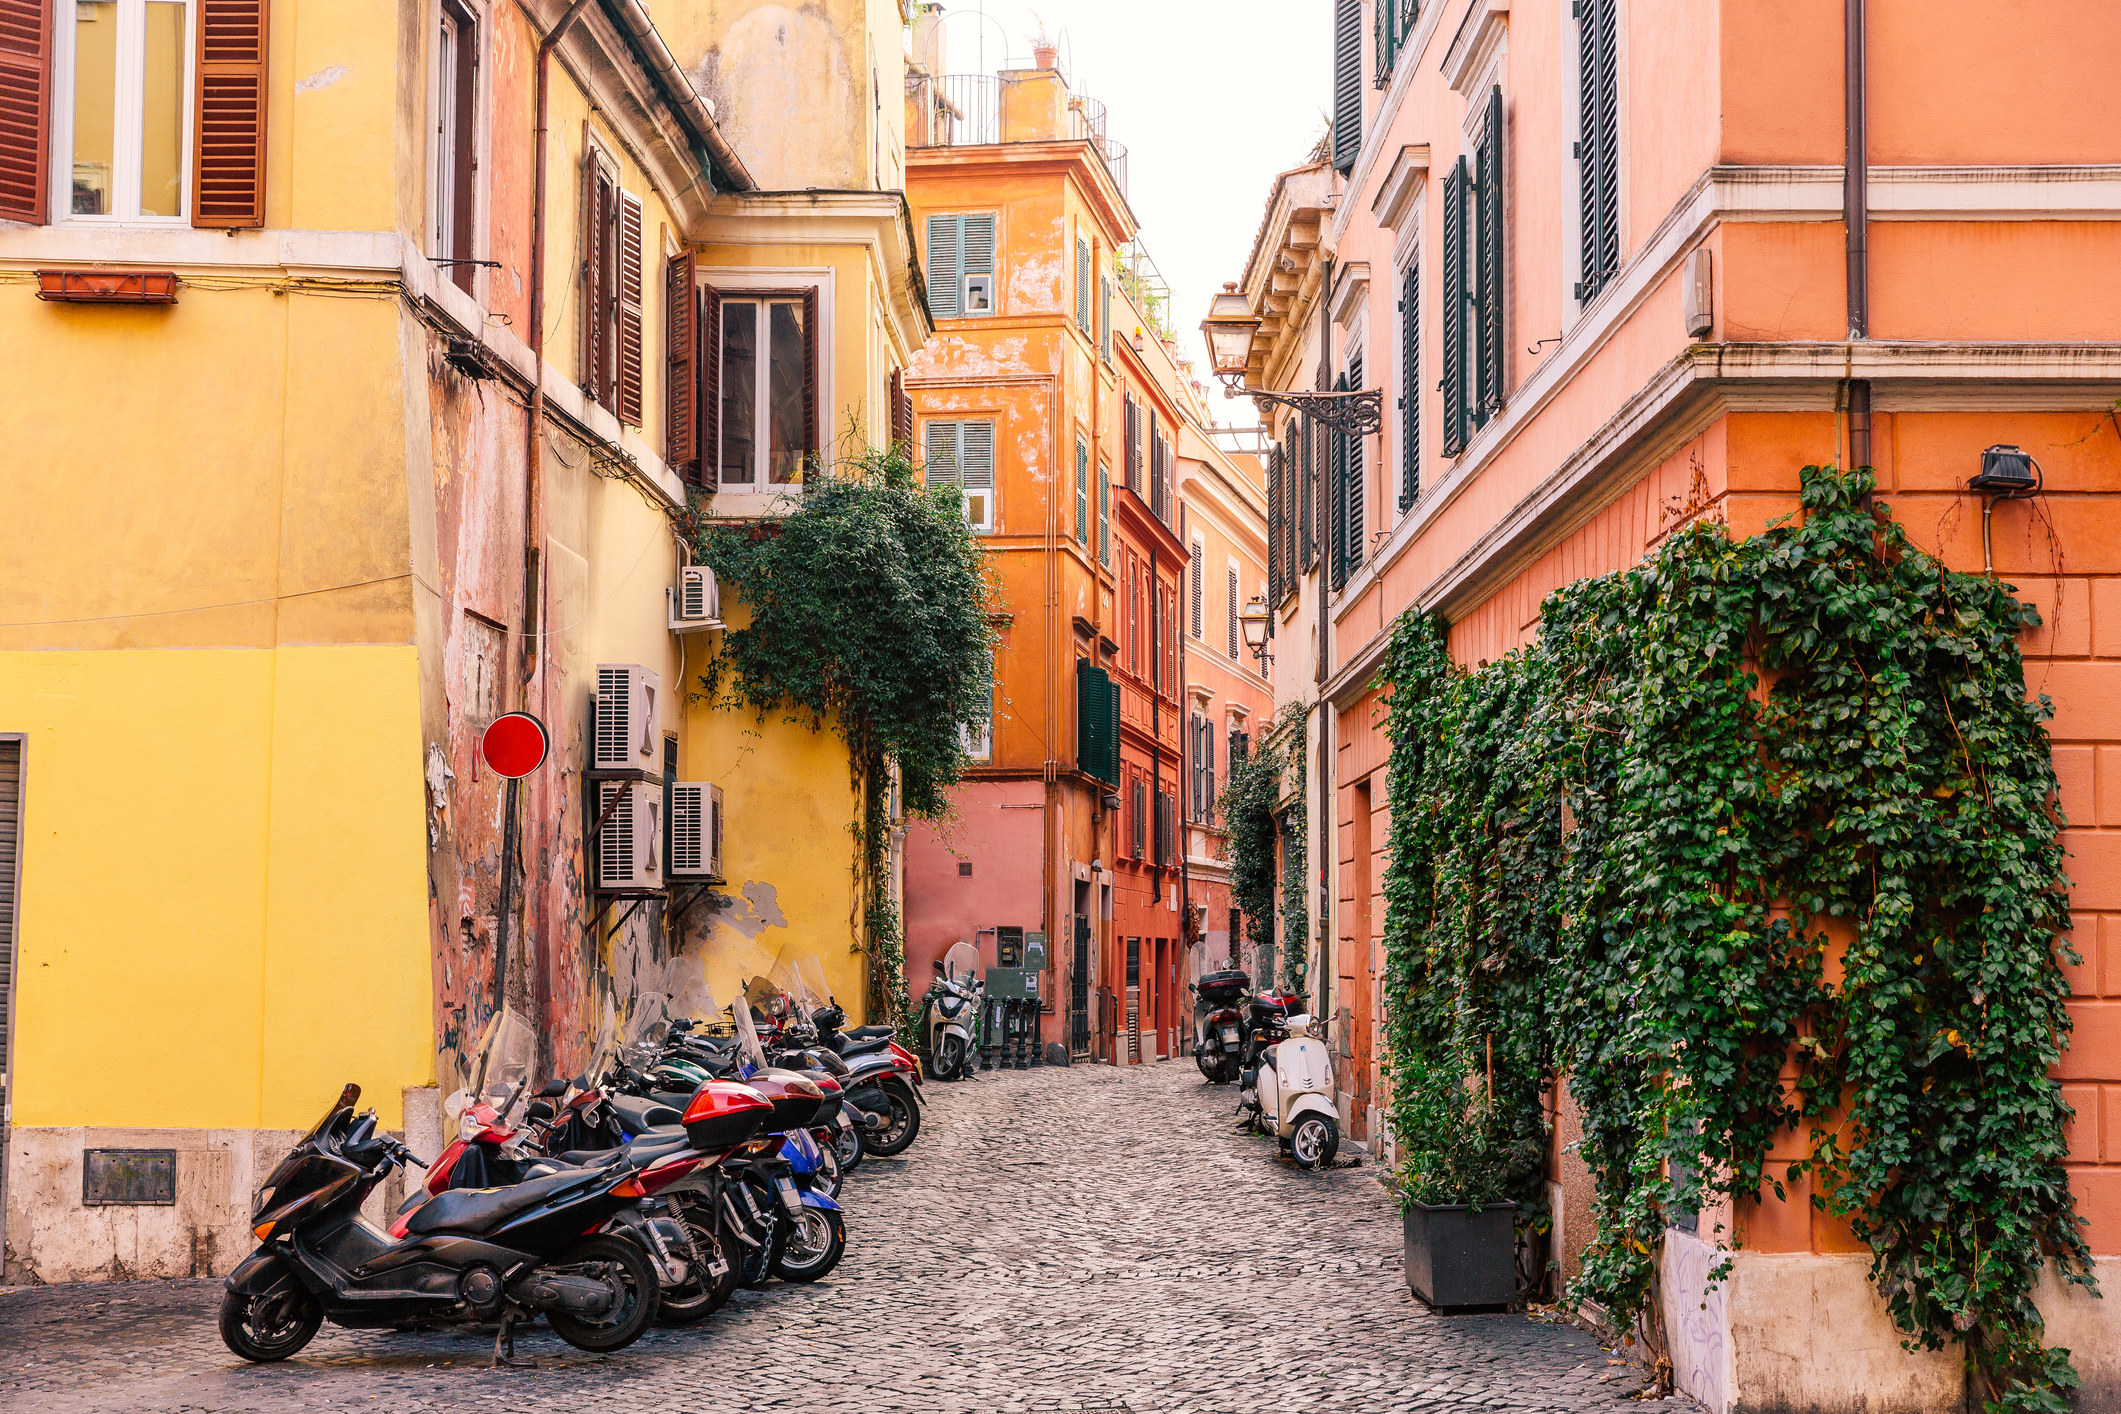 A quiet neighborhood in Rome with colorful buildings and mopeds